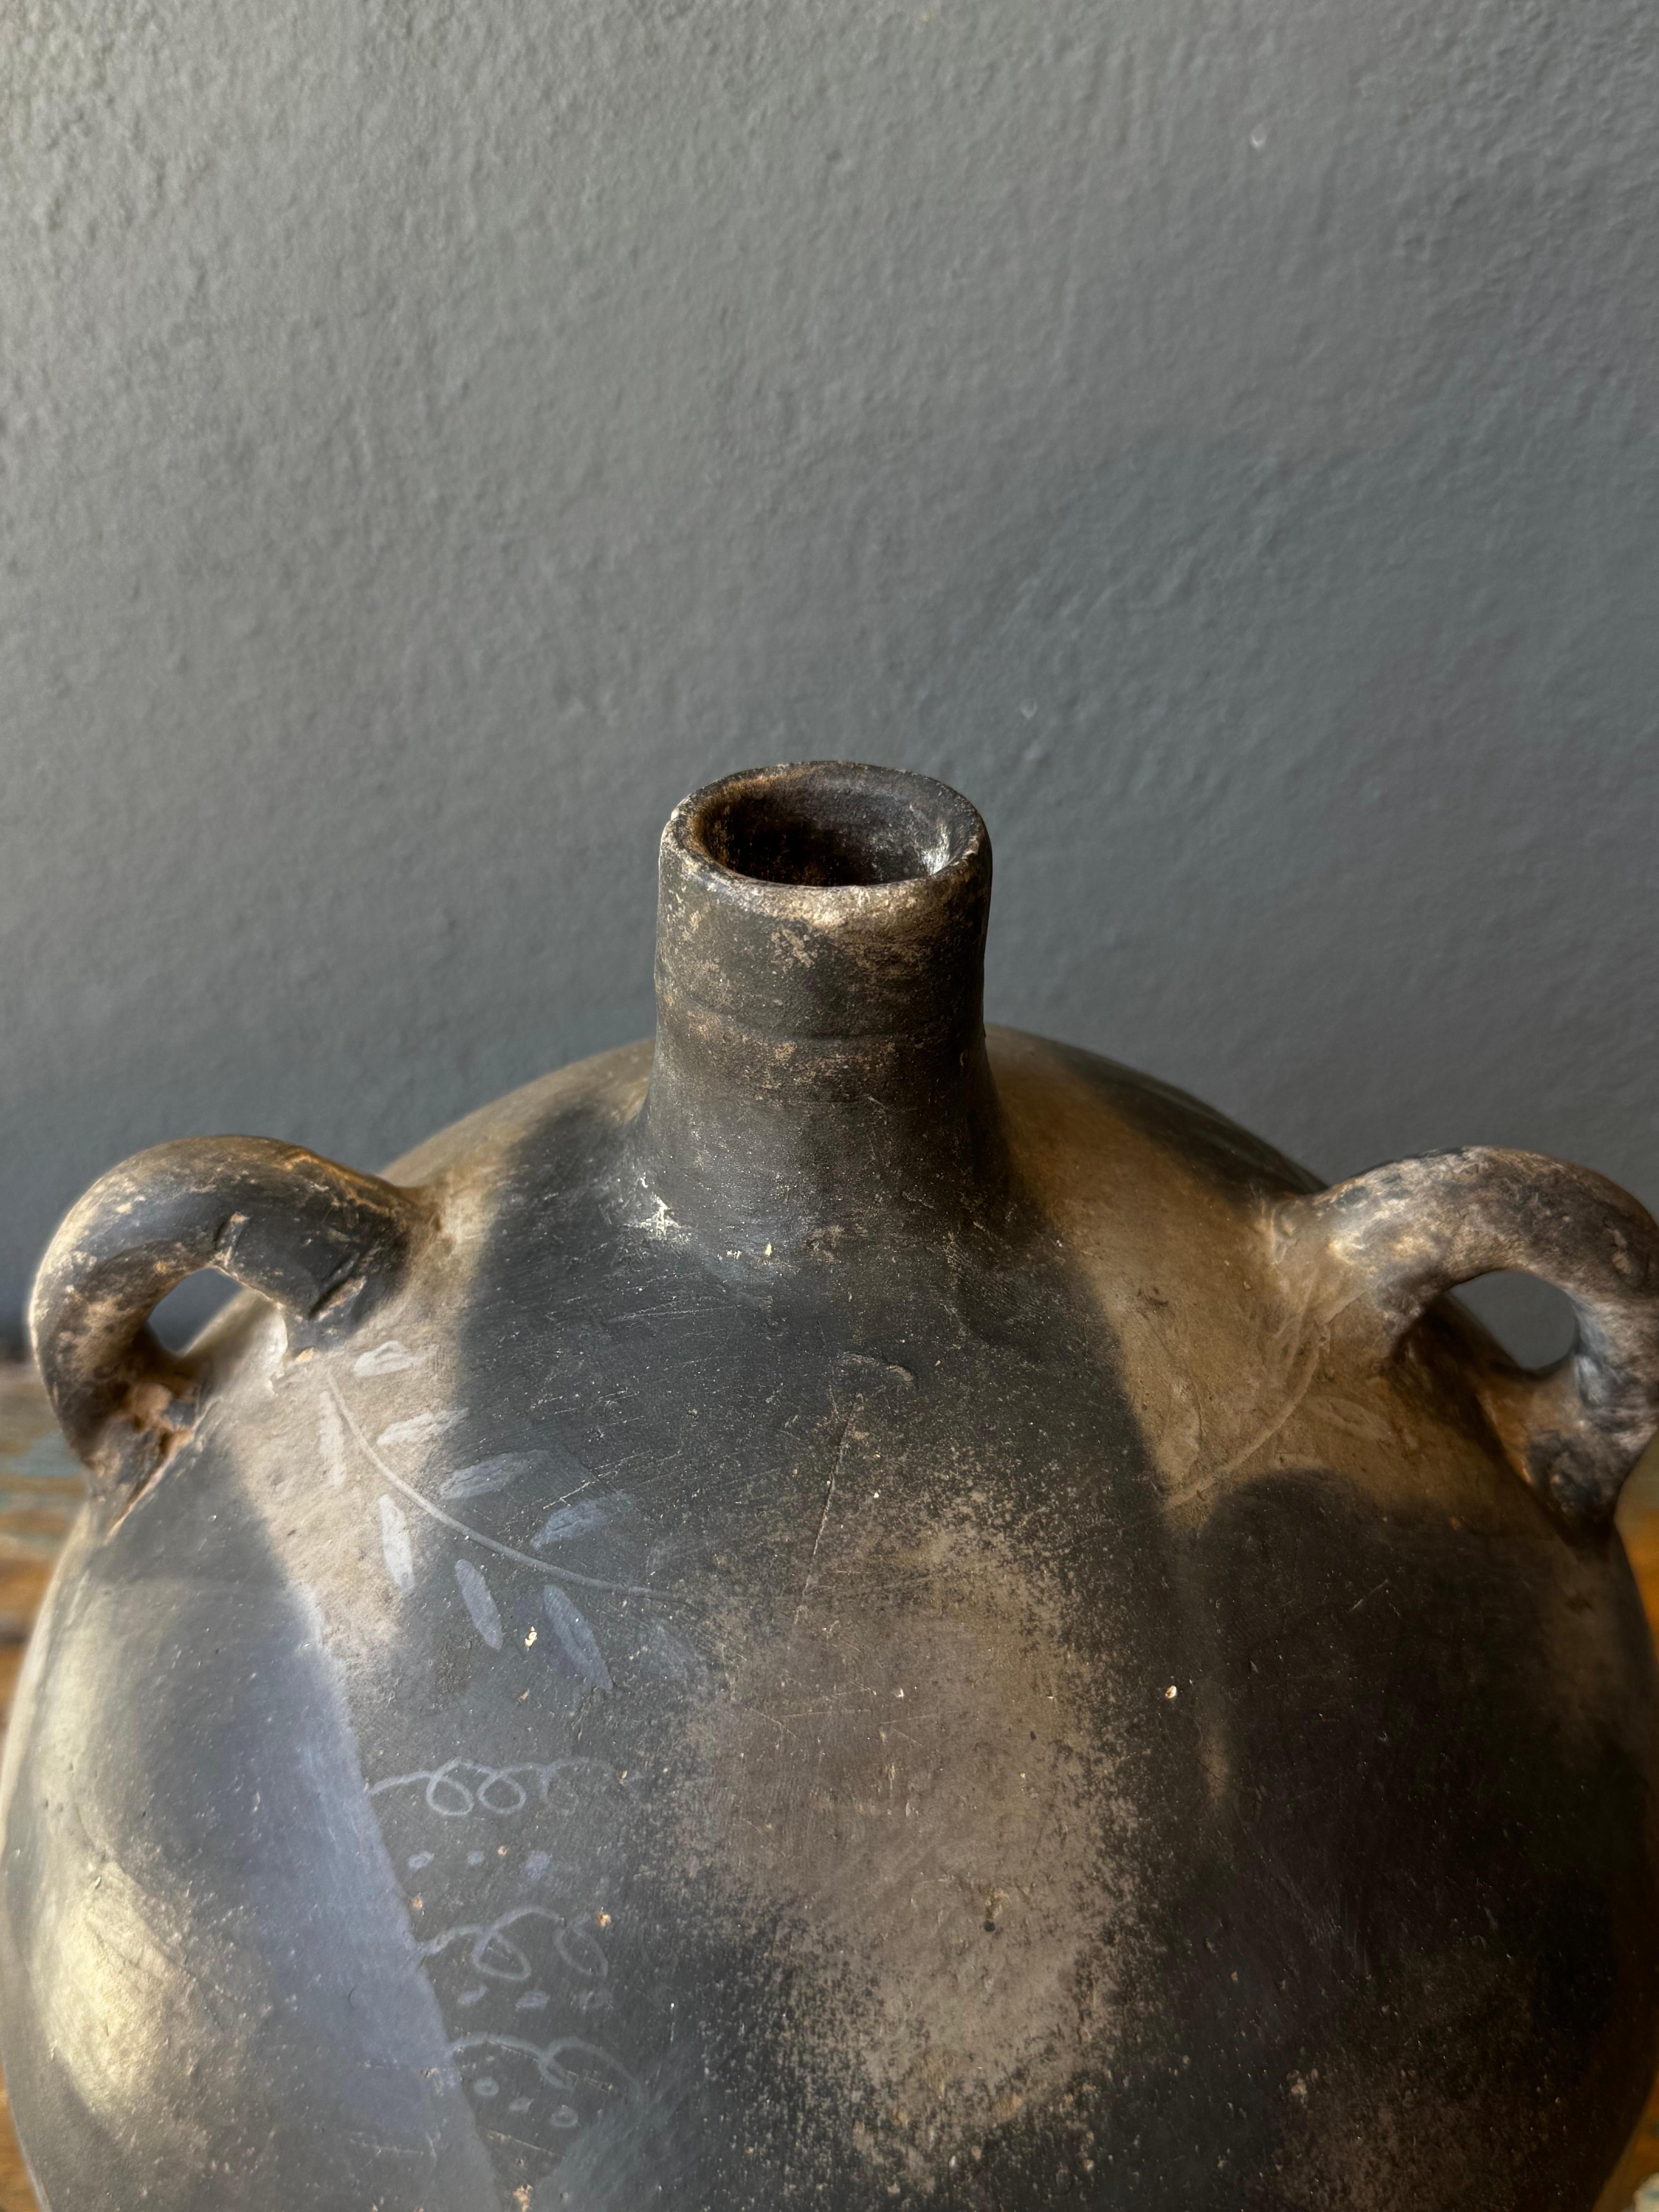 Black clay ceramic mezcal jug from Coyotepec, Oaxaca, circa 1950´s. Rare mezcal jug used for ceremonial or festive reunions. Decorative, leaf markings can be seen around the neck area. Rope would be laced around the handles for portability.